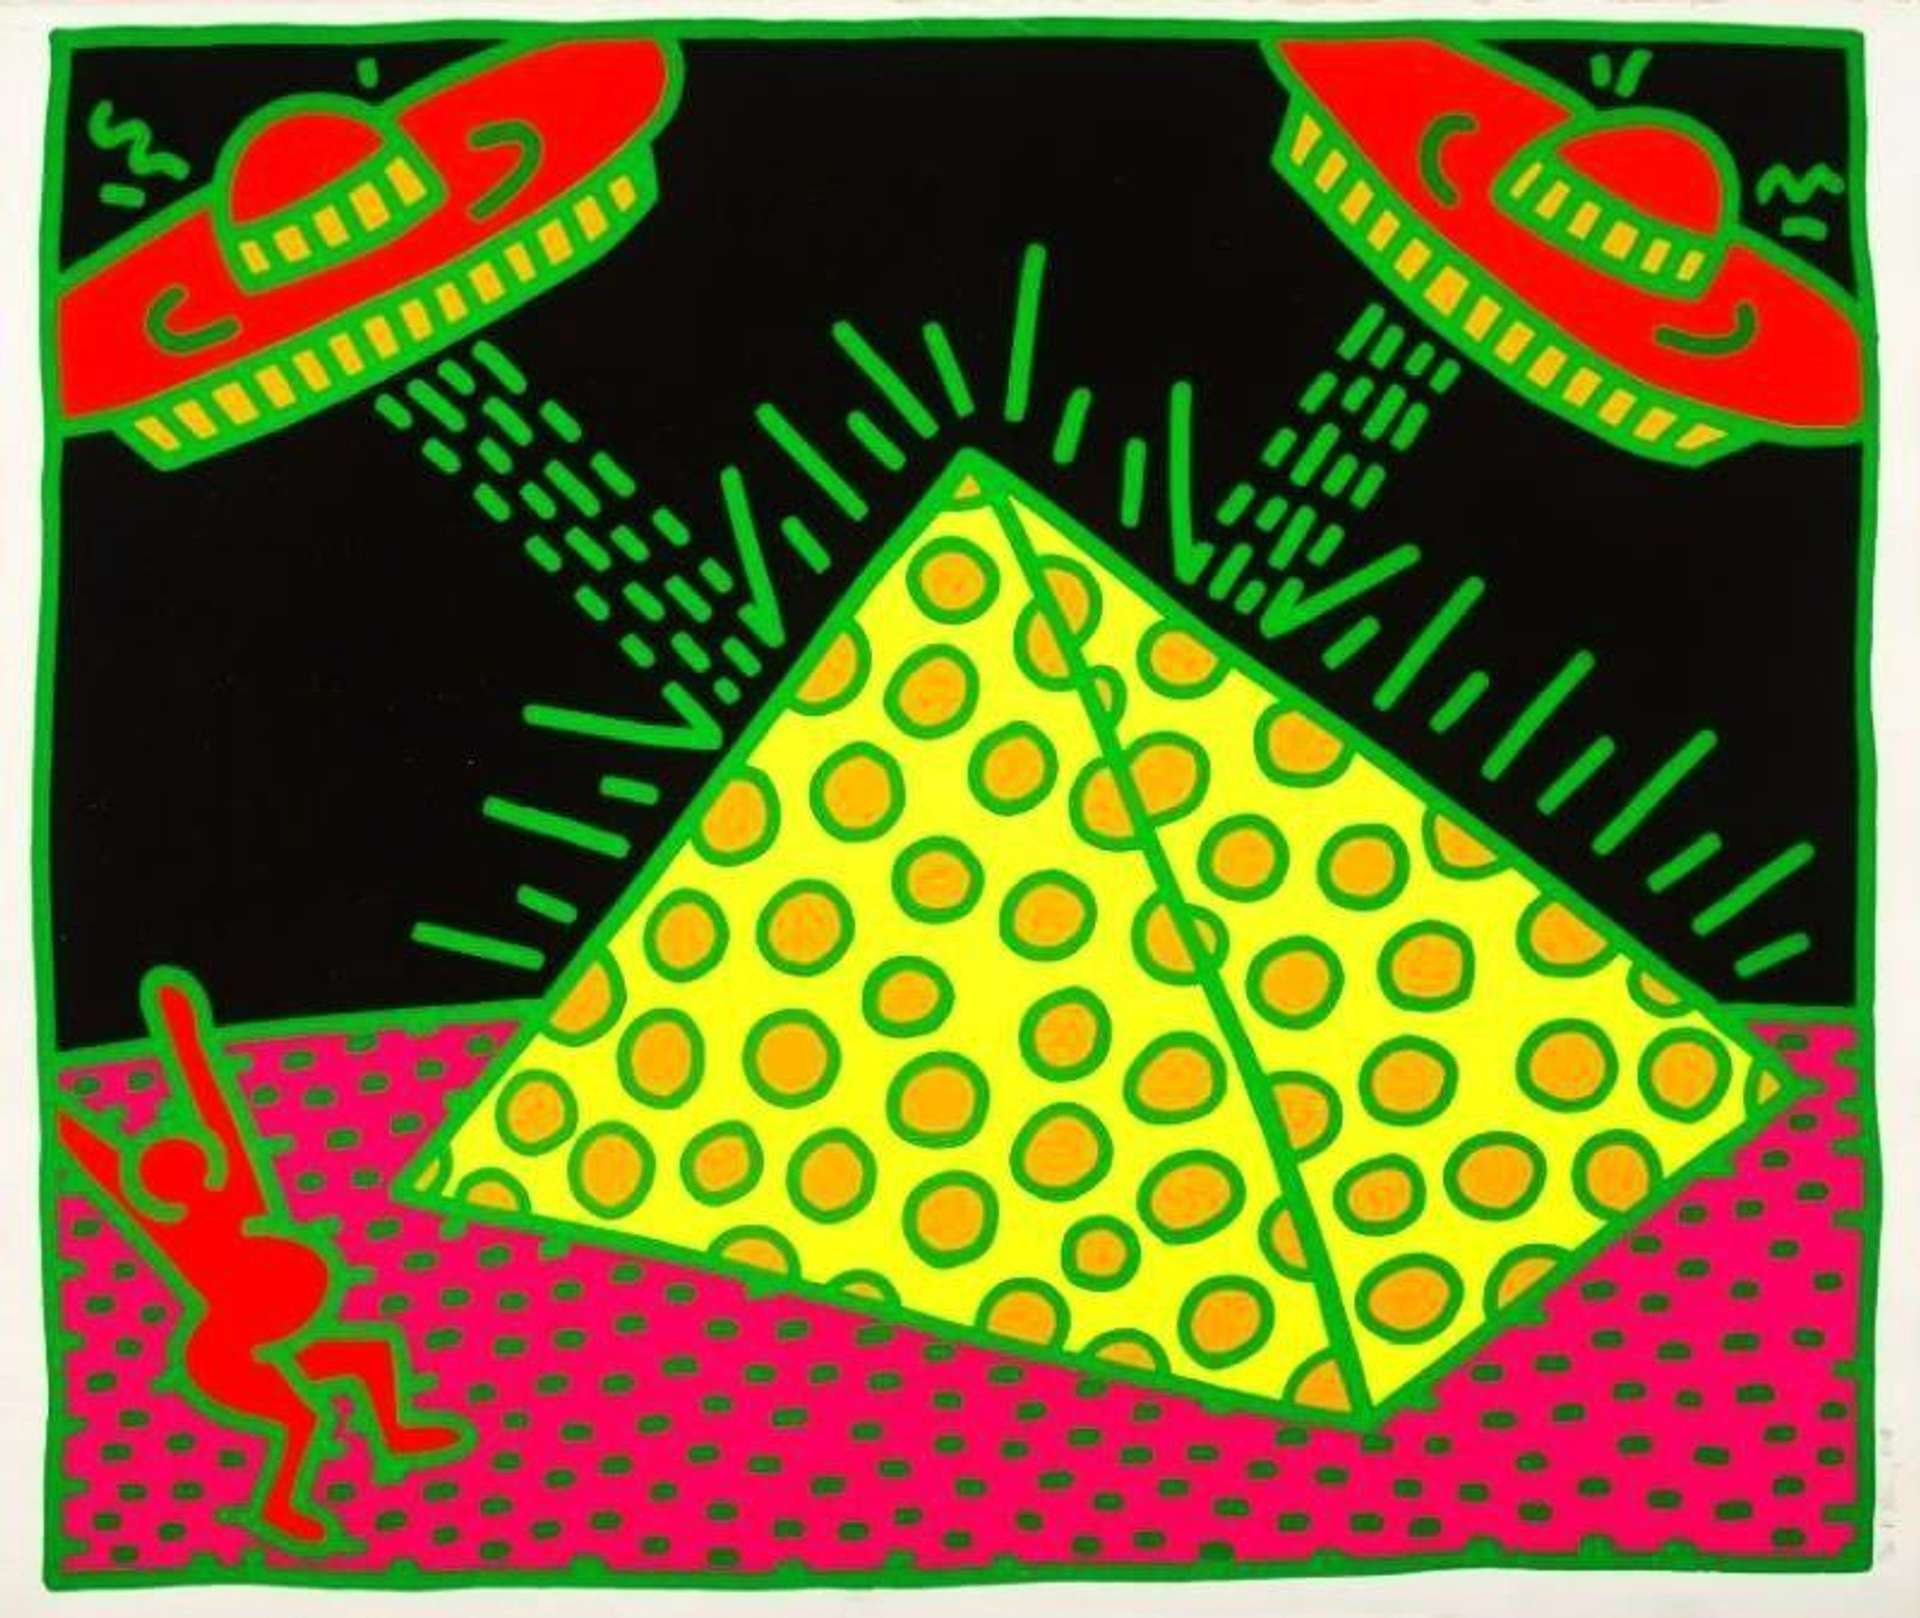 A screenprint by Keith Haring depicting a fluorescent yellow and green pyramid being shot at by two flying saucers. 